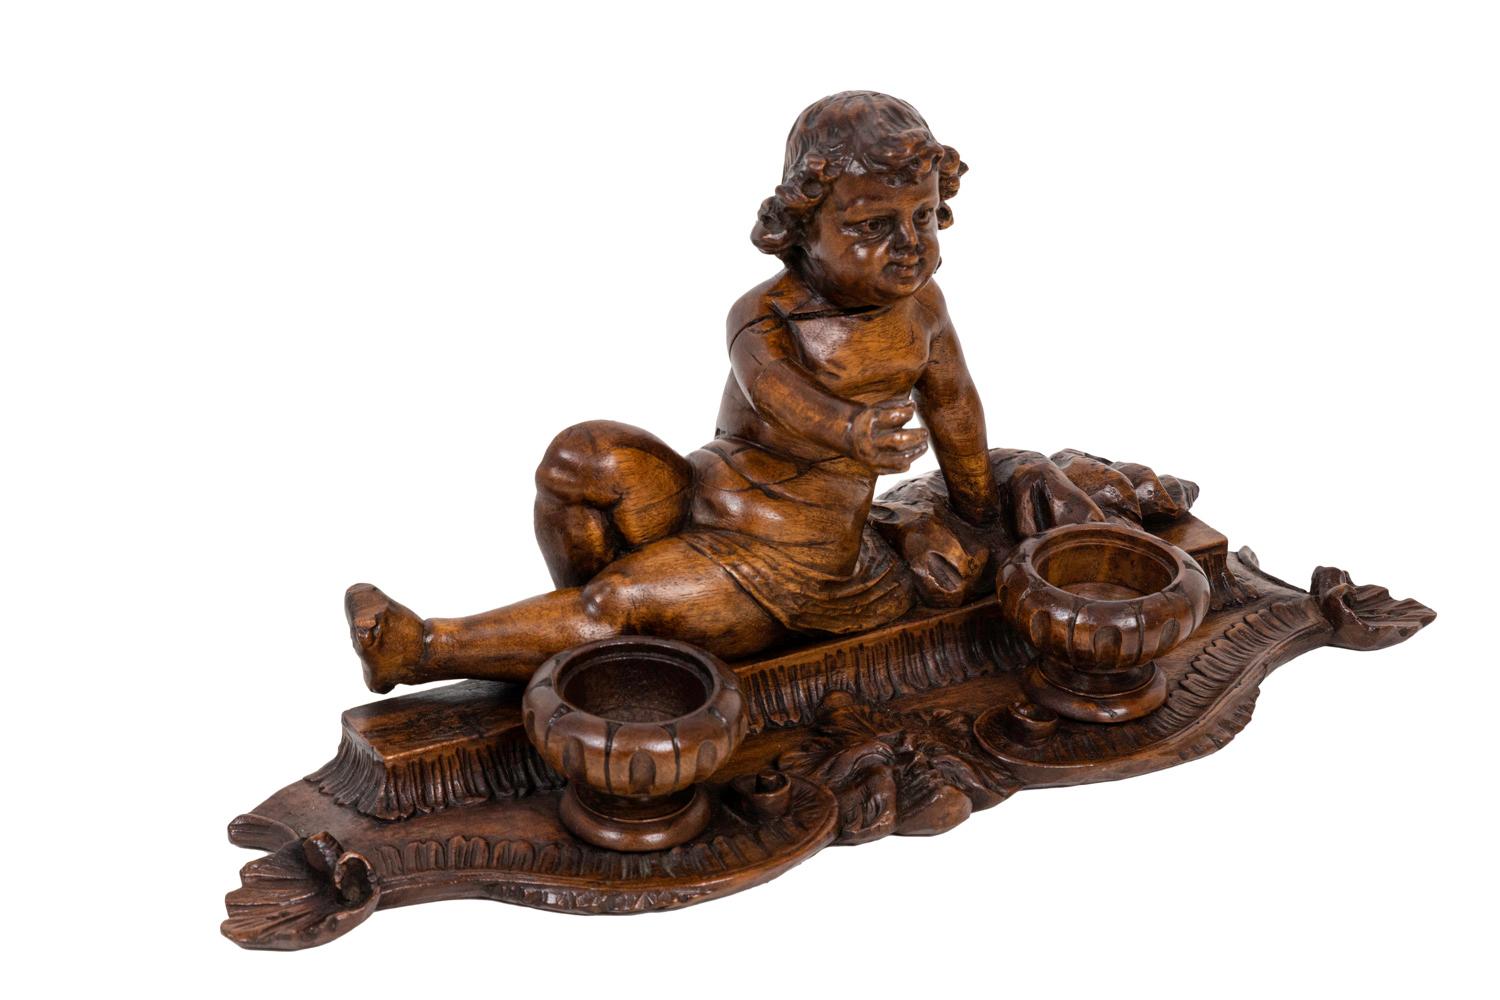 Inkwell in wood figuring a slightly lied down child only dressed with a simple cloth around his hips. He stands on a small piedestal adorned with water leaves. Two circular fluted inkwells in front of him. Scalloped base decorated with c-crests and